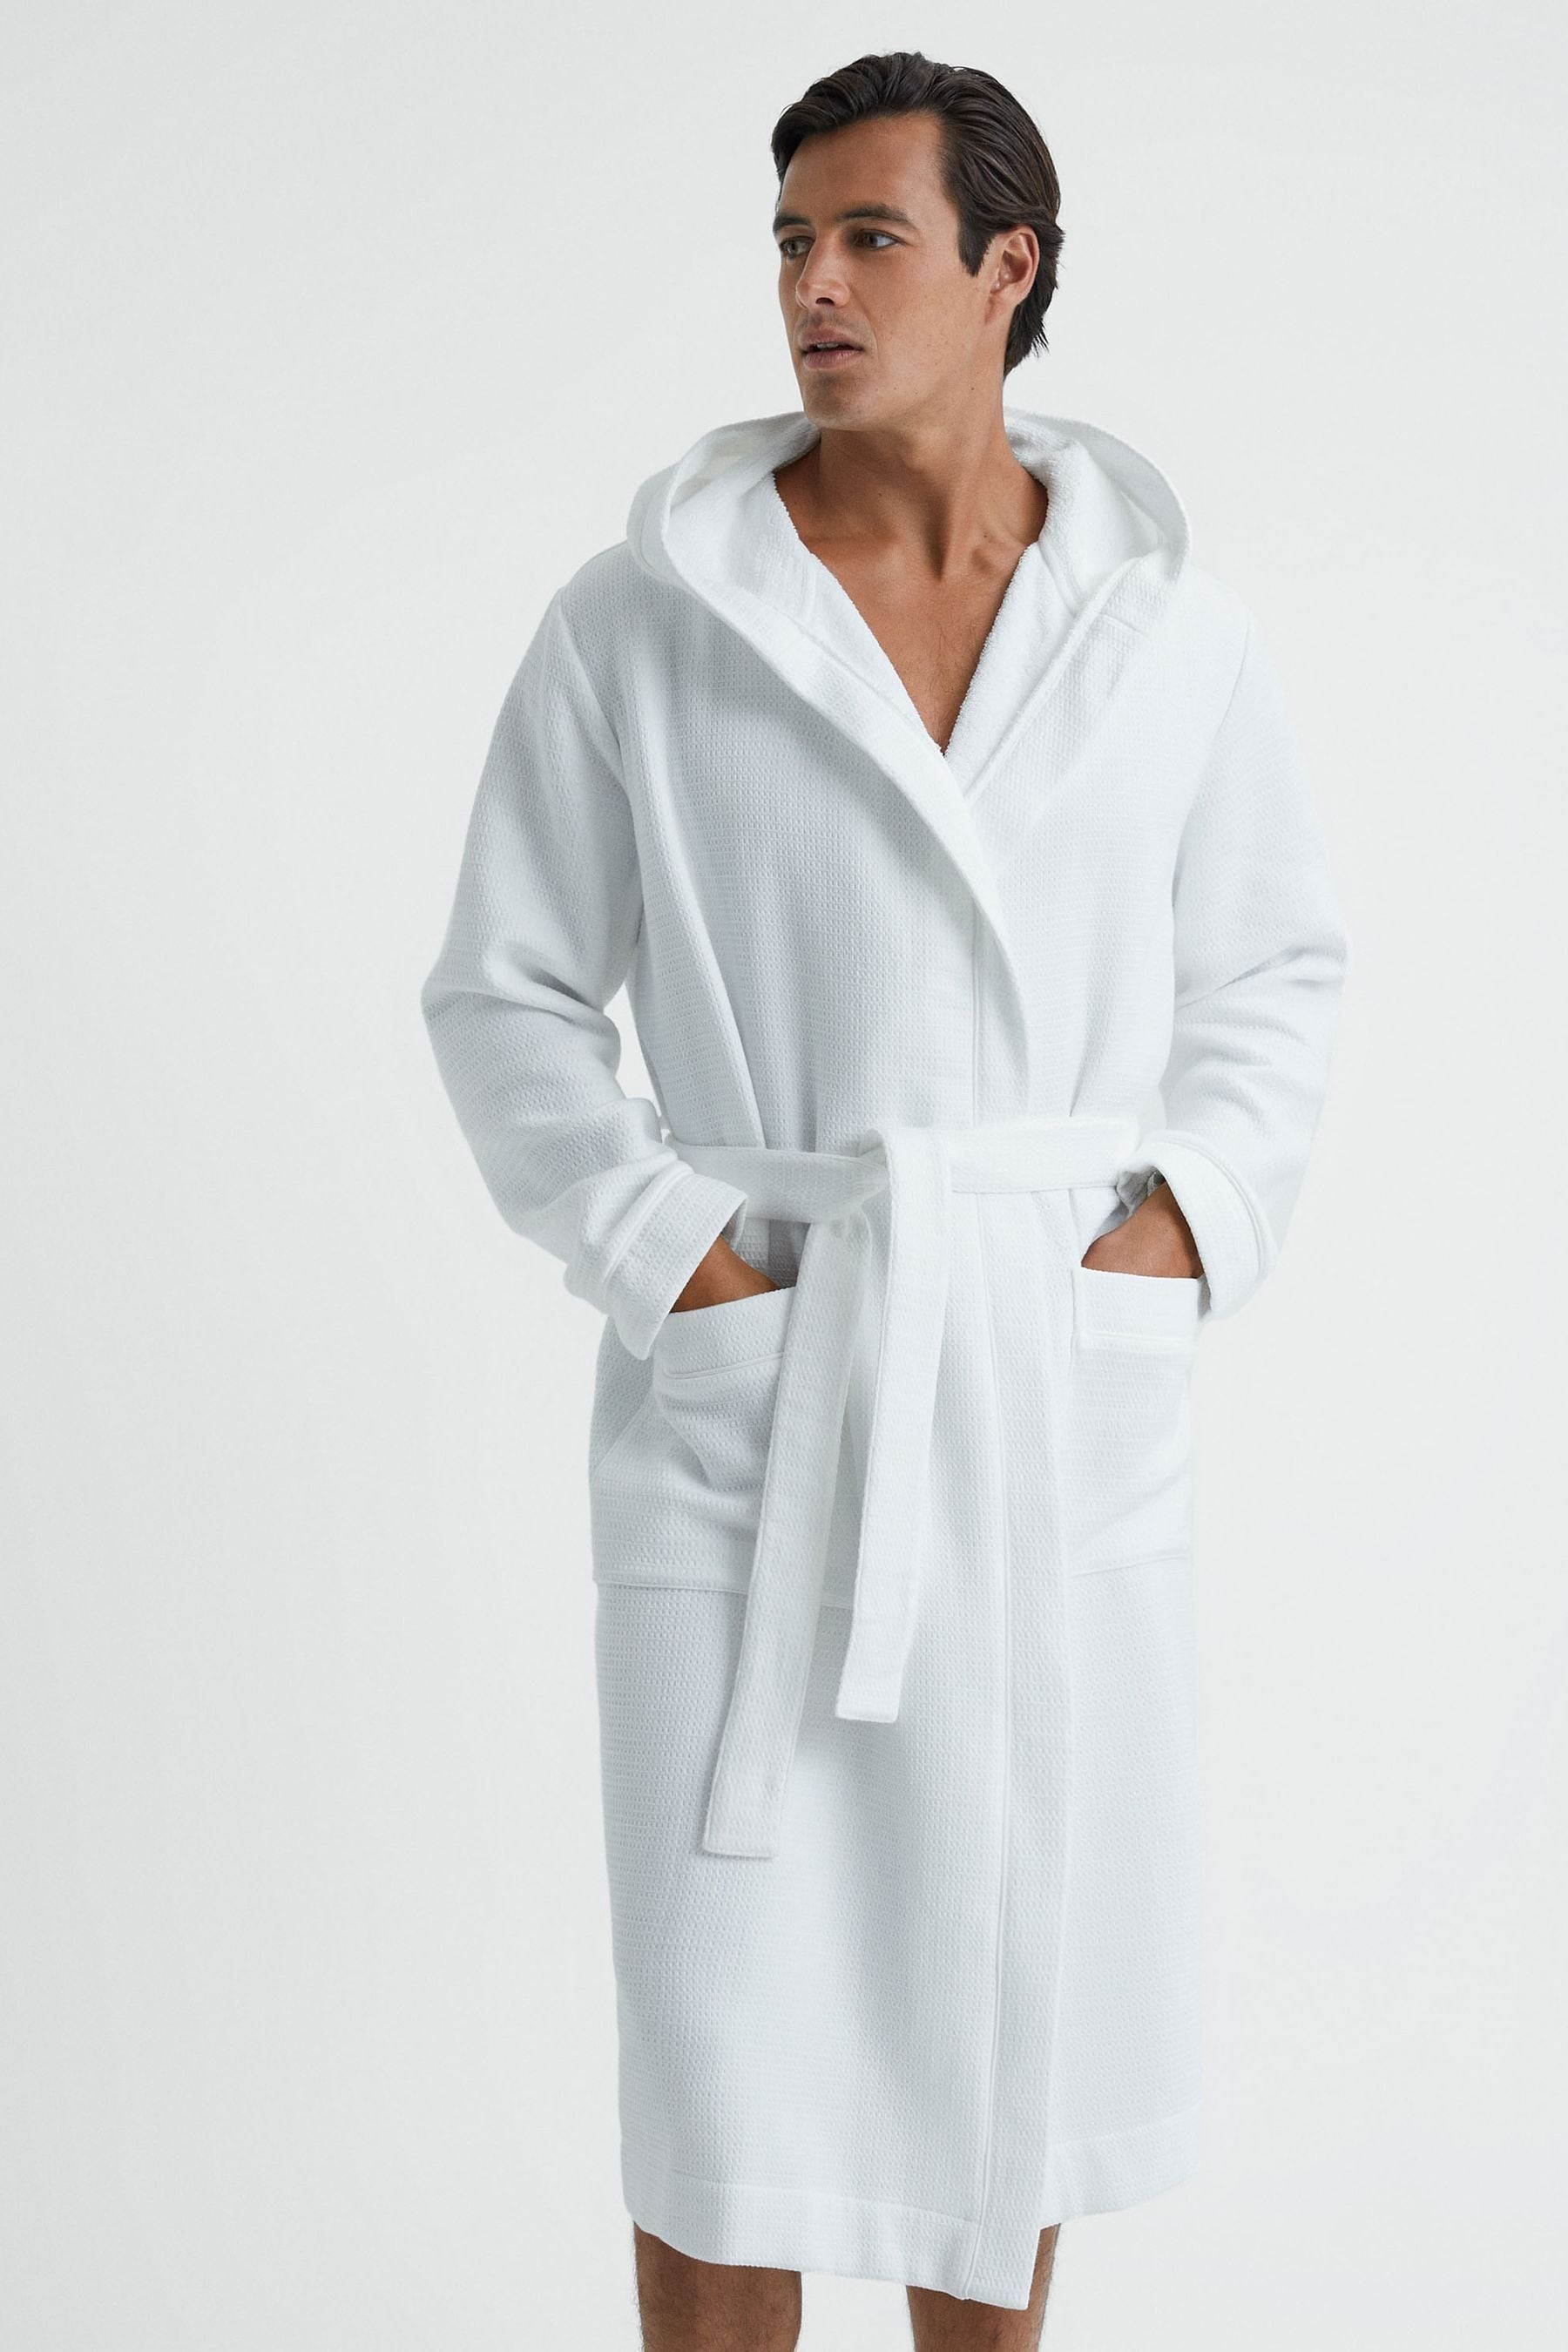 Reiss Coastal - White Textured Cotton Hooded Dressing Gown, M